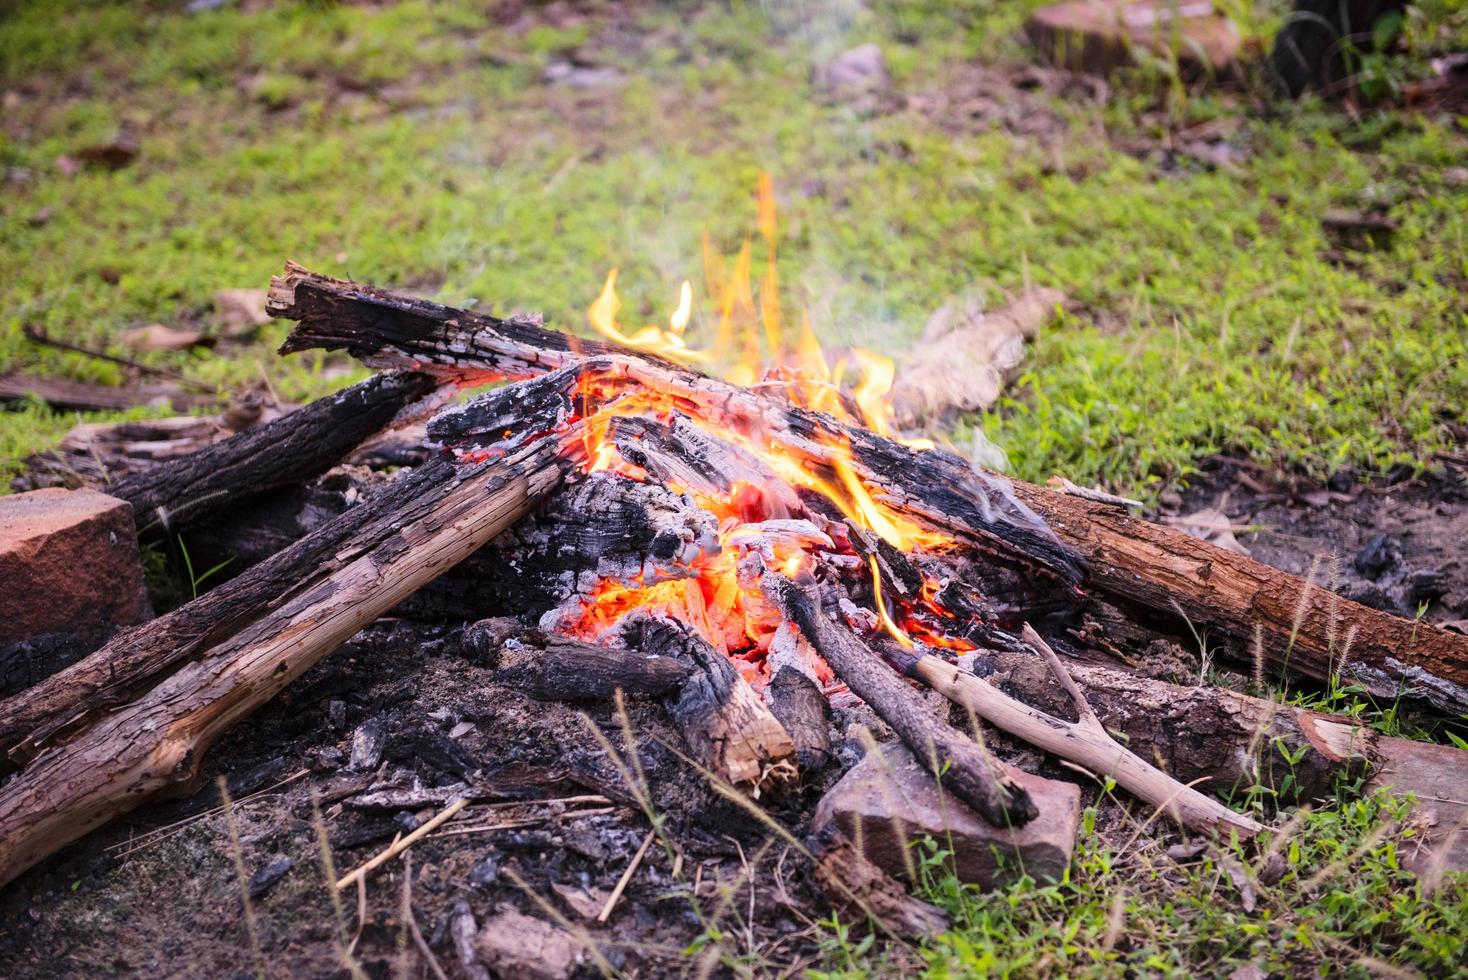 Feuer Camping Brennholz - Lagerfeuerwald foto